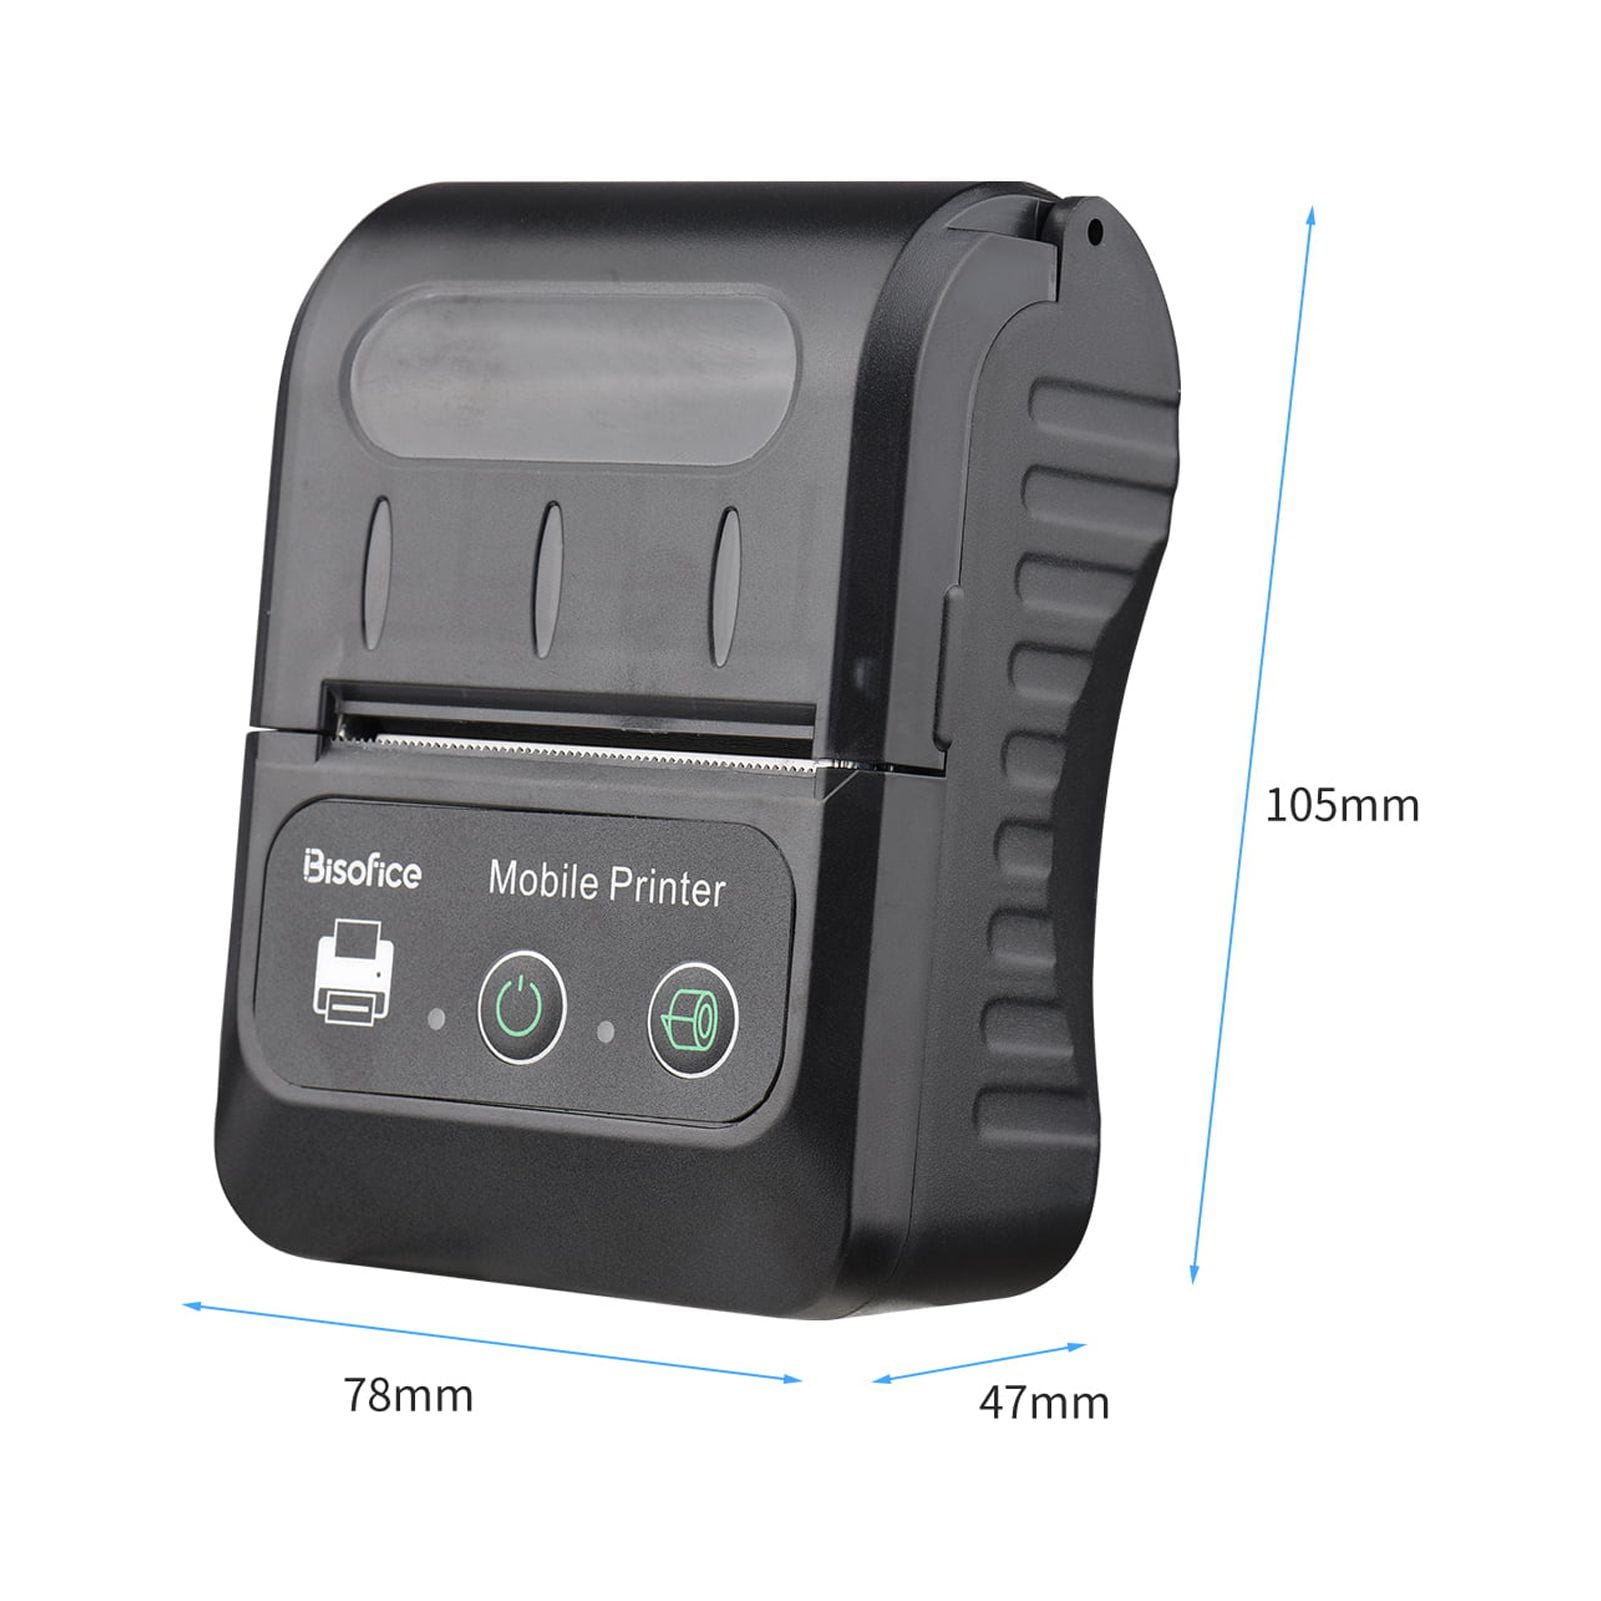 Bisofice Bisofice Portable 58mm Receipt Thermal Printer 2 Inches Mobile Pocket Printers With 6 6660